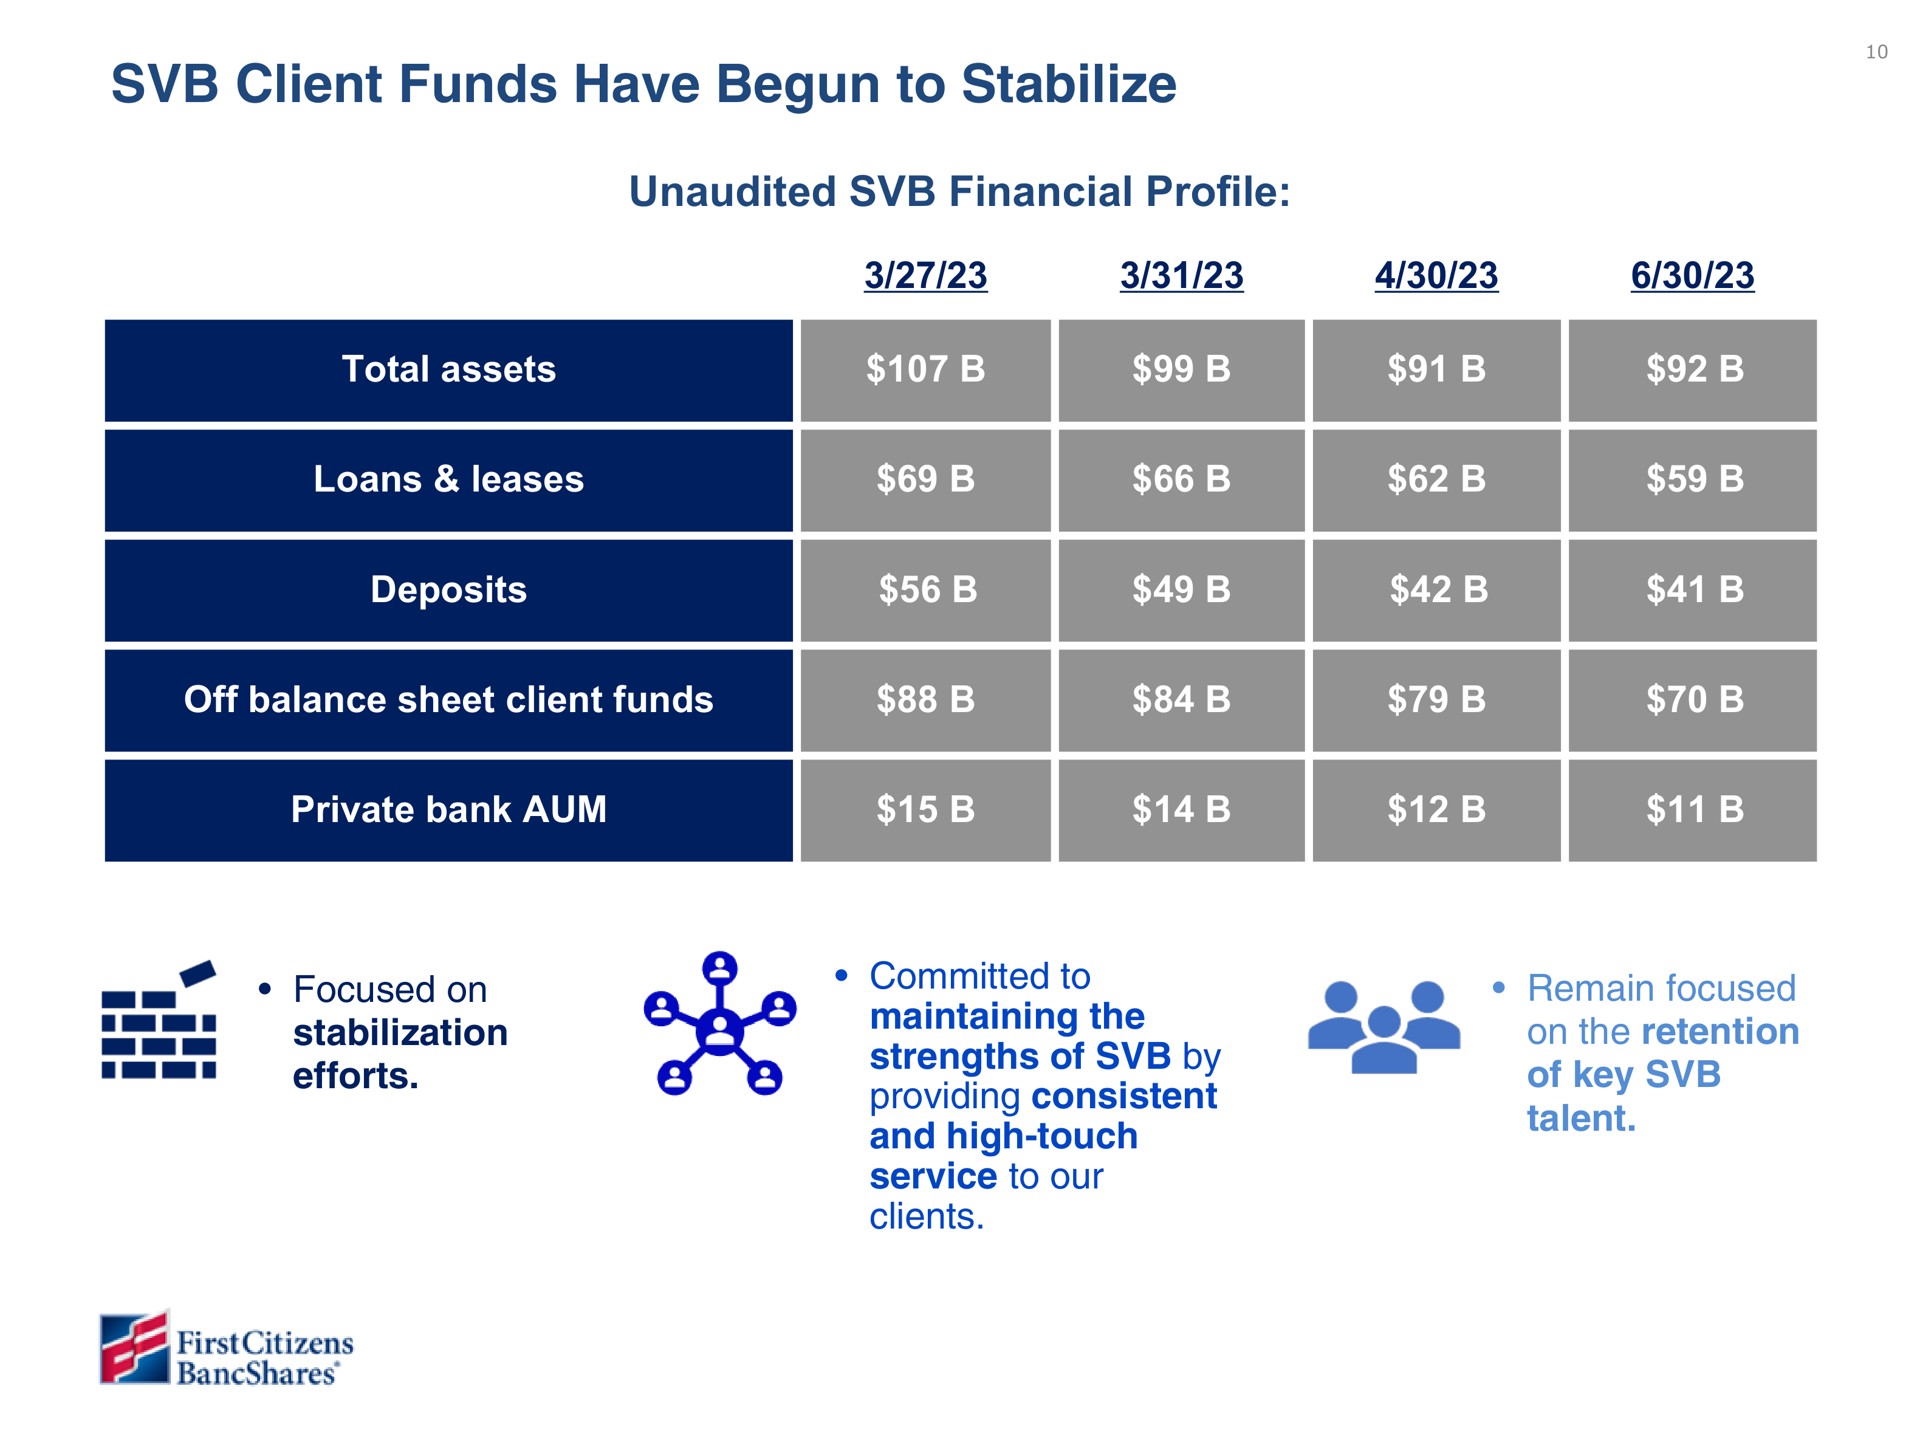 client funds have begun to stabilize unaudited financial profile off balance sheet focused on stabilization efforts strengths of by providing consistent and high touch service our on remain focused on the retention of key | First Citizens BancShares